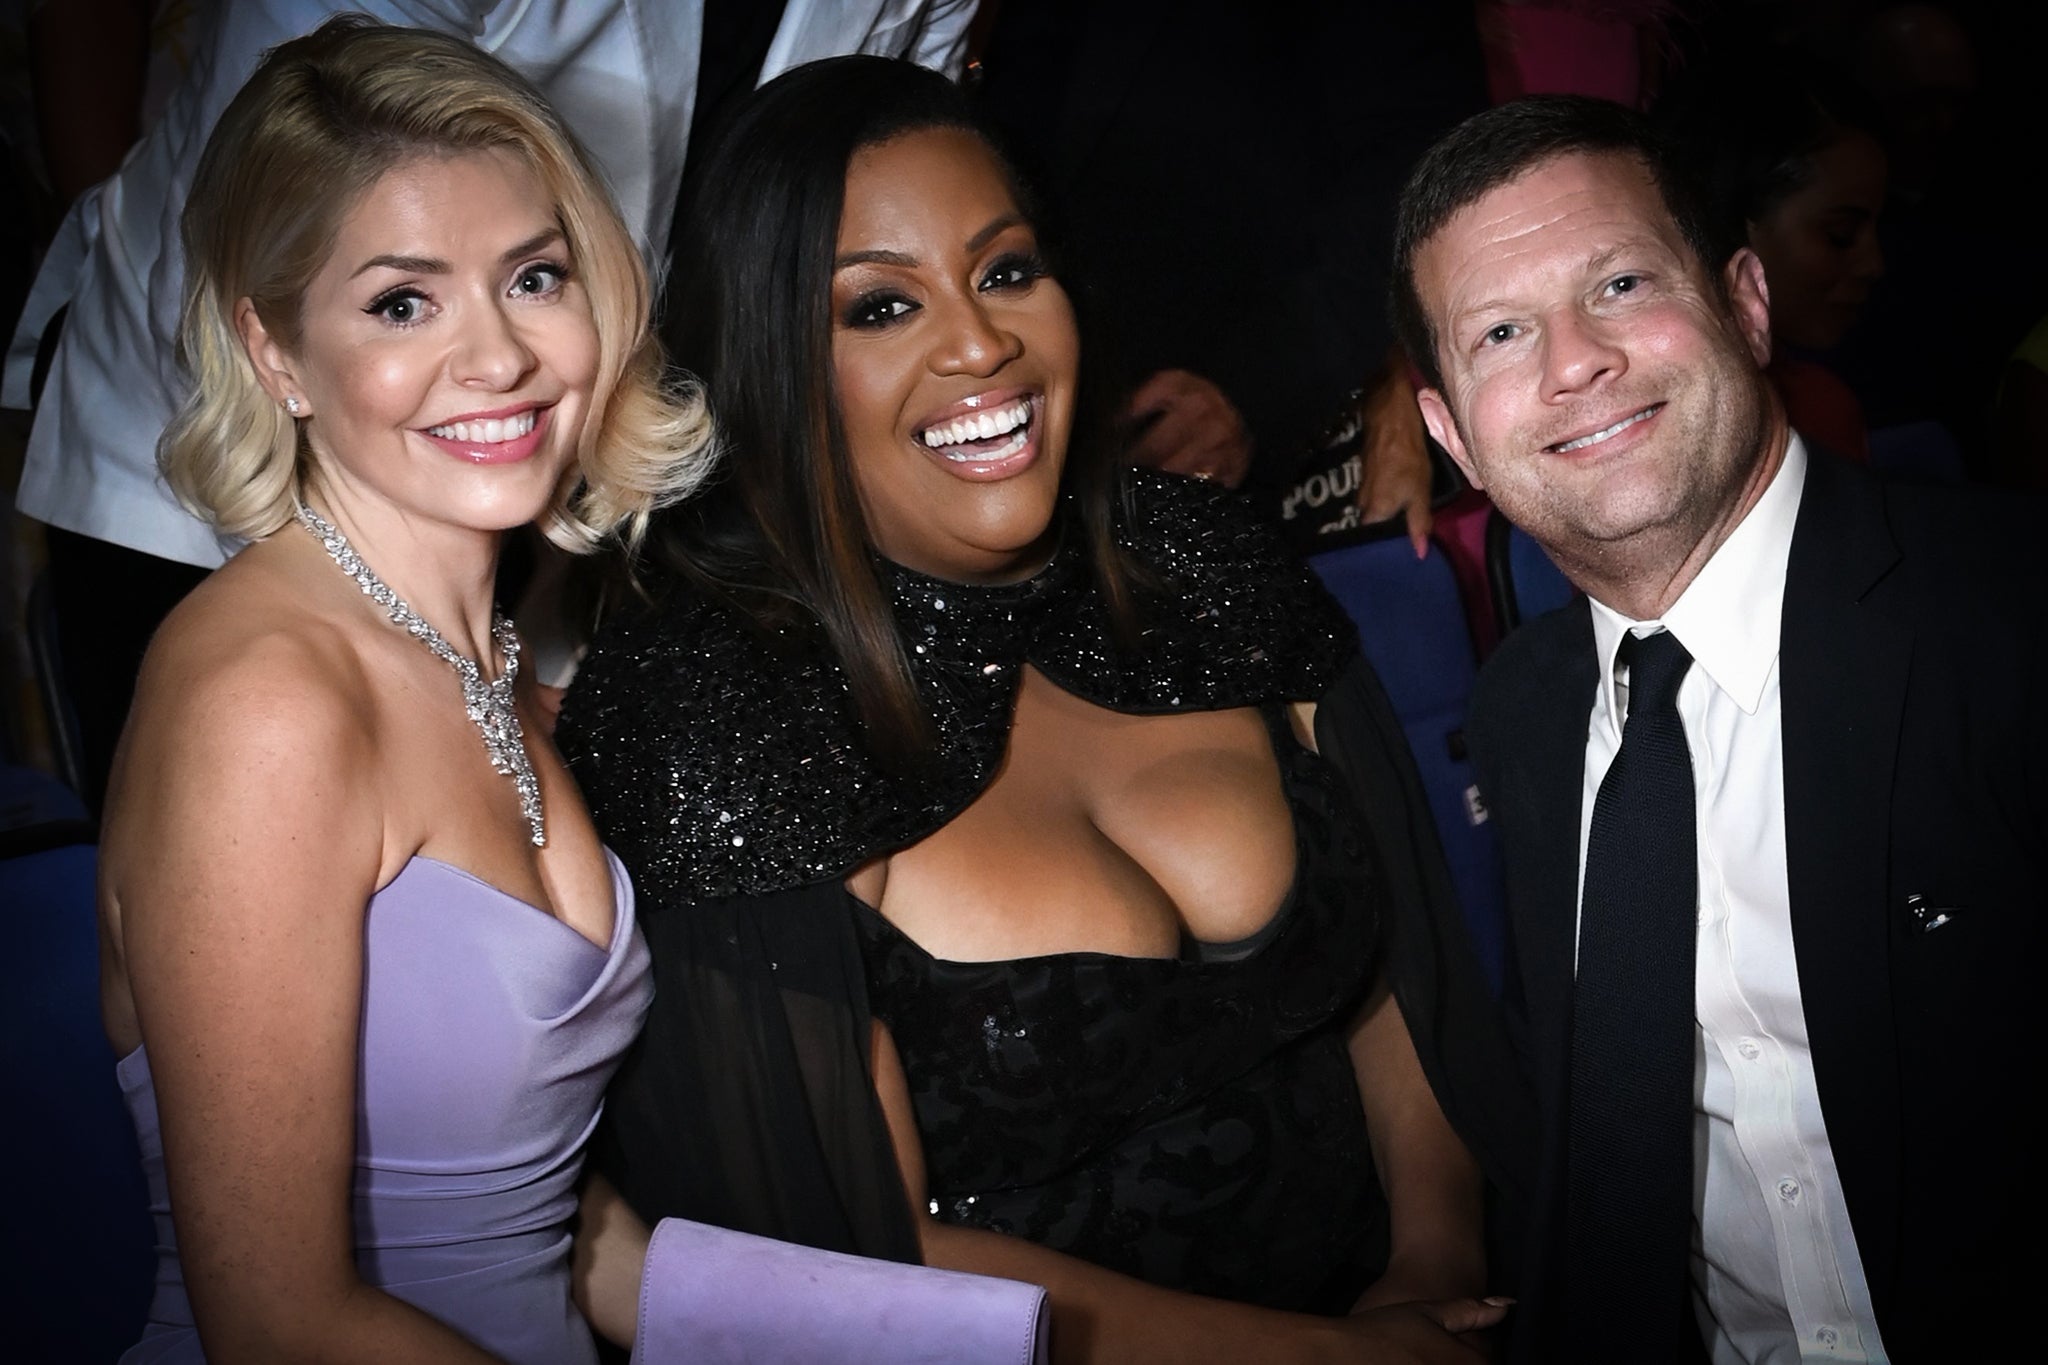 The equivalent of a political party losing an extremely safe seat: ‘This Morning’ survivors Holly Willoughby, Alison Hammond and Dermot O’Leary ahead of their loss at last night’s NTAs